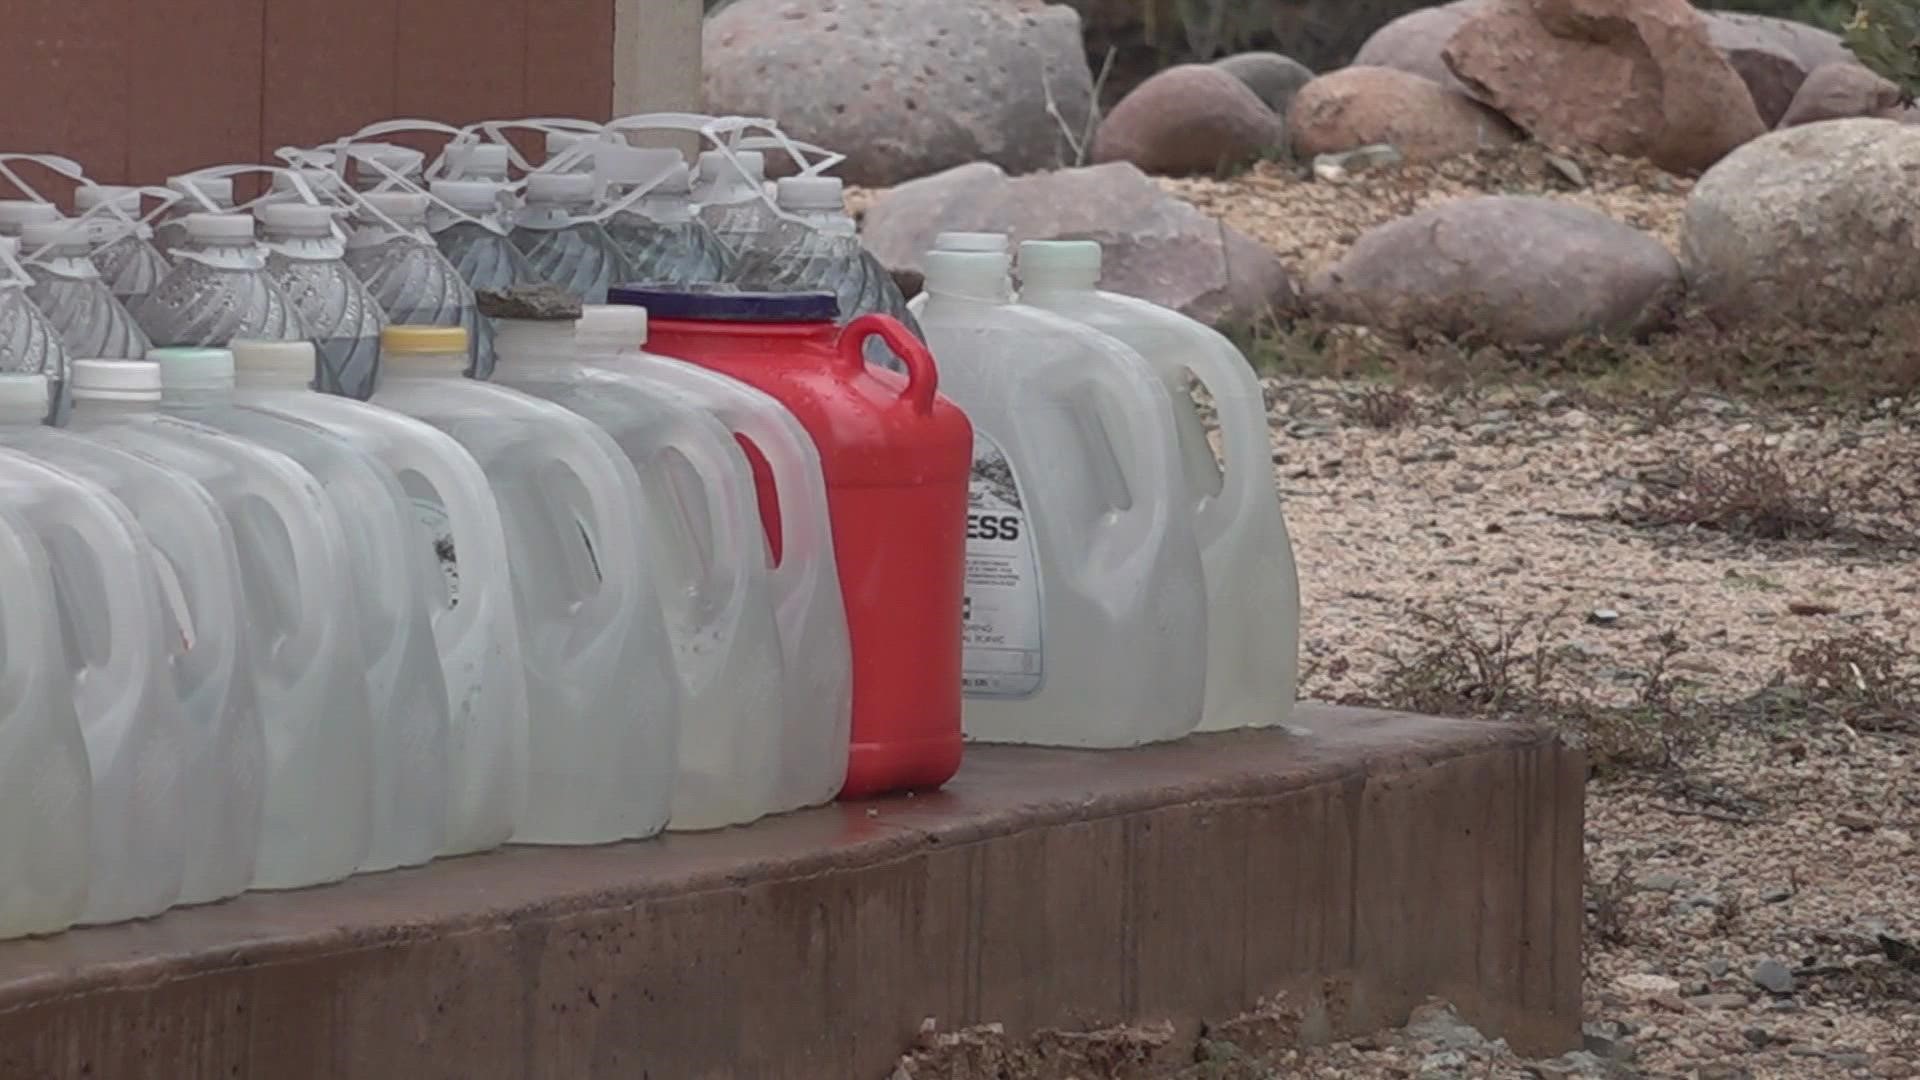 Rio Verde Foothills residents are asking the Arizona Corporation Commission for help after Scottsdale cut off their access to the city's water.